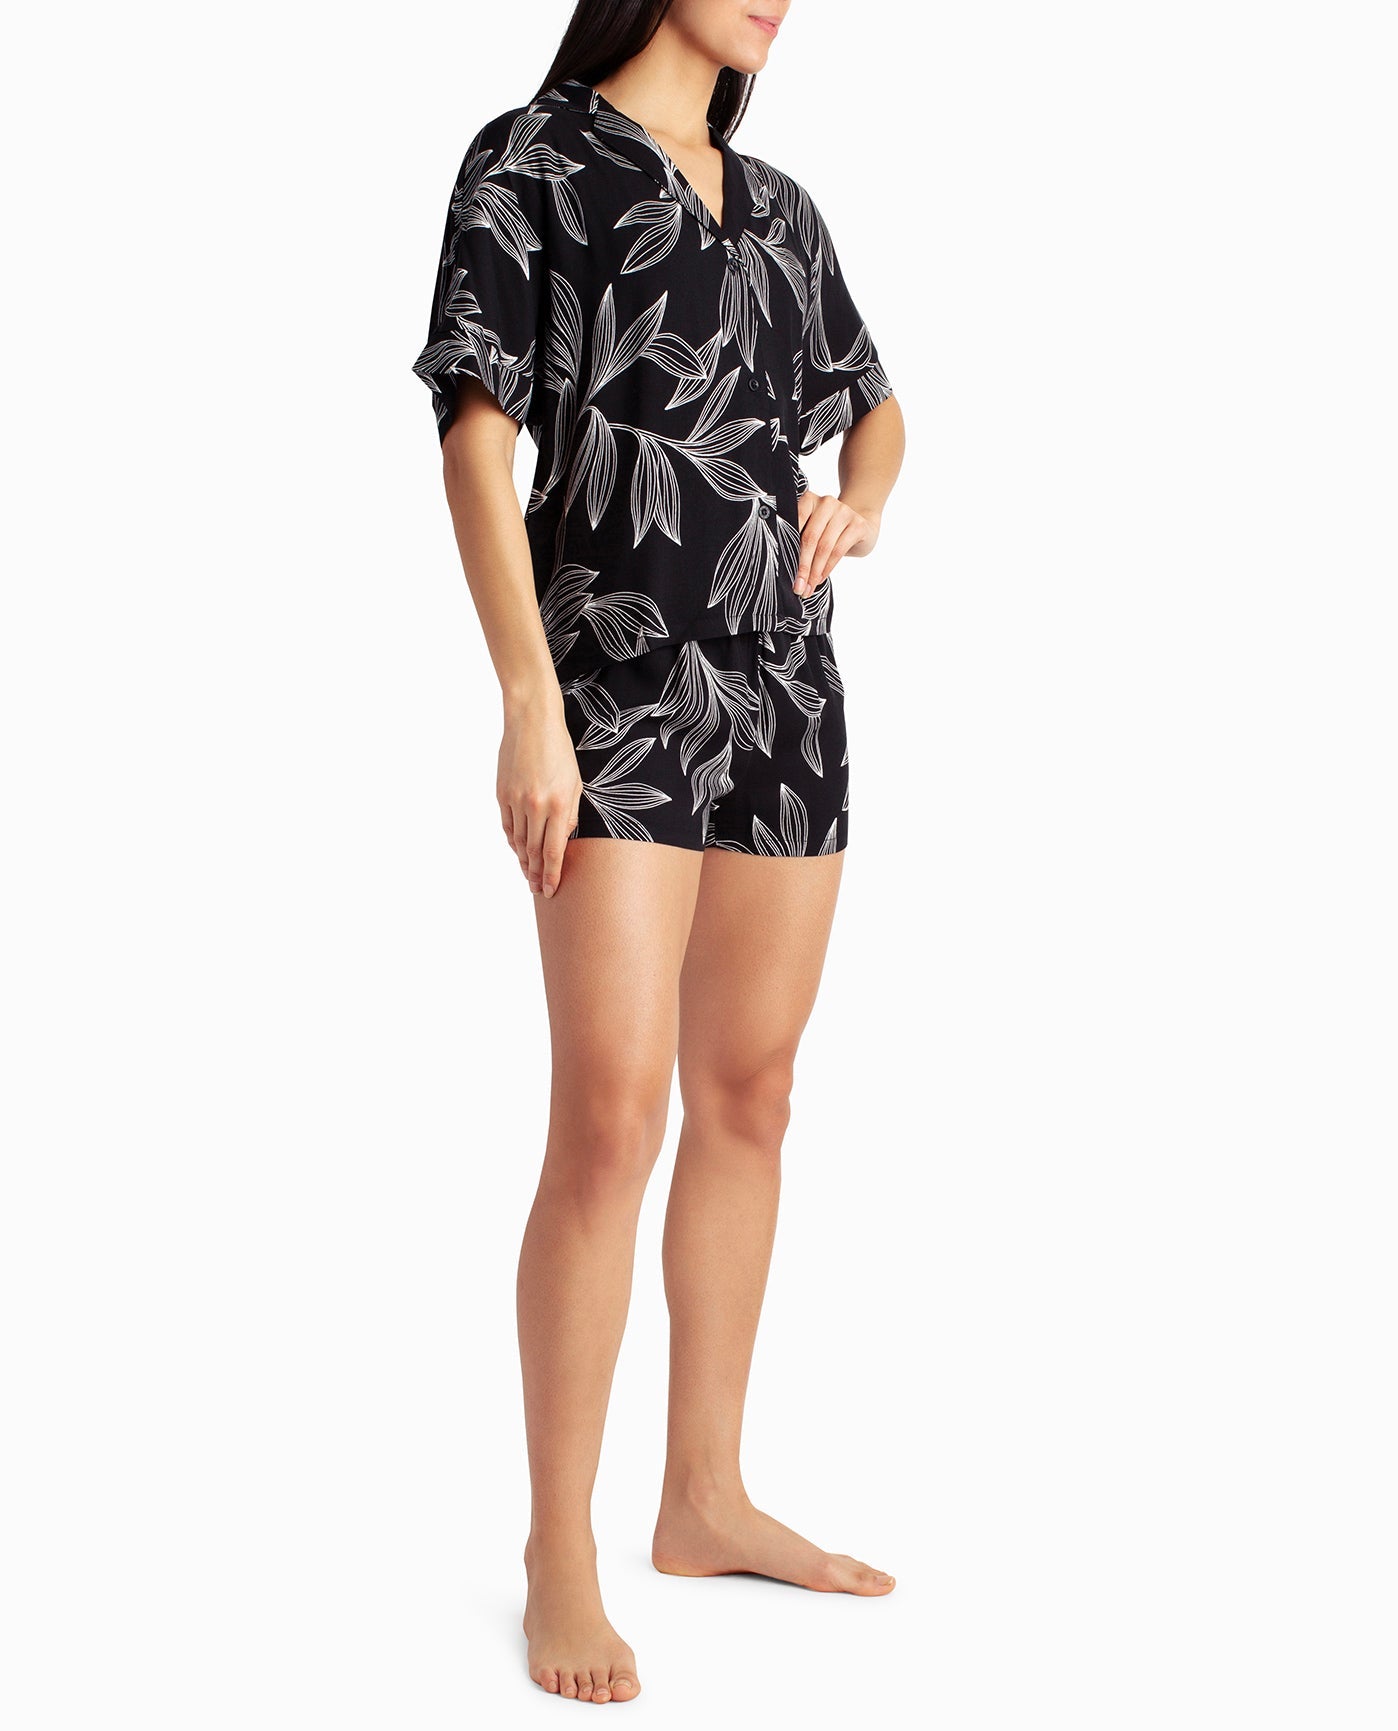 SIDE OF WOVEN SHIRT AND SHORT TWO-PIECE SLEEPWEAR SET | Black Leaf